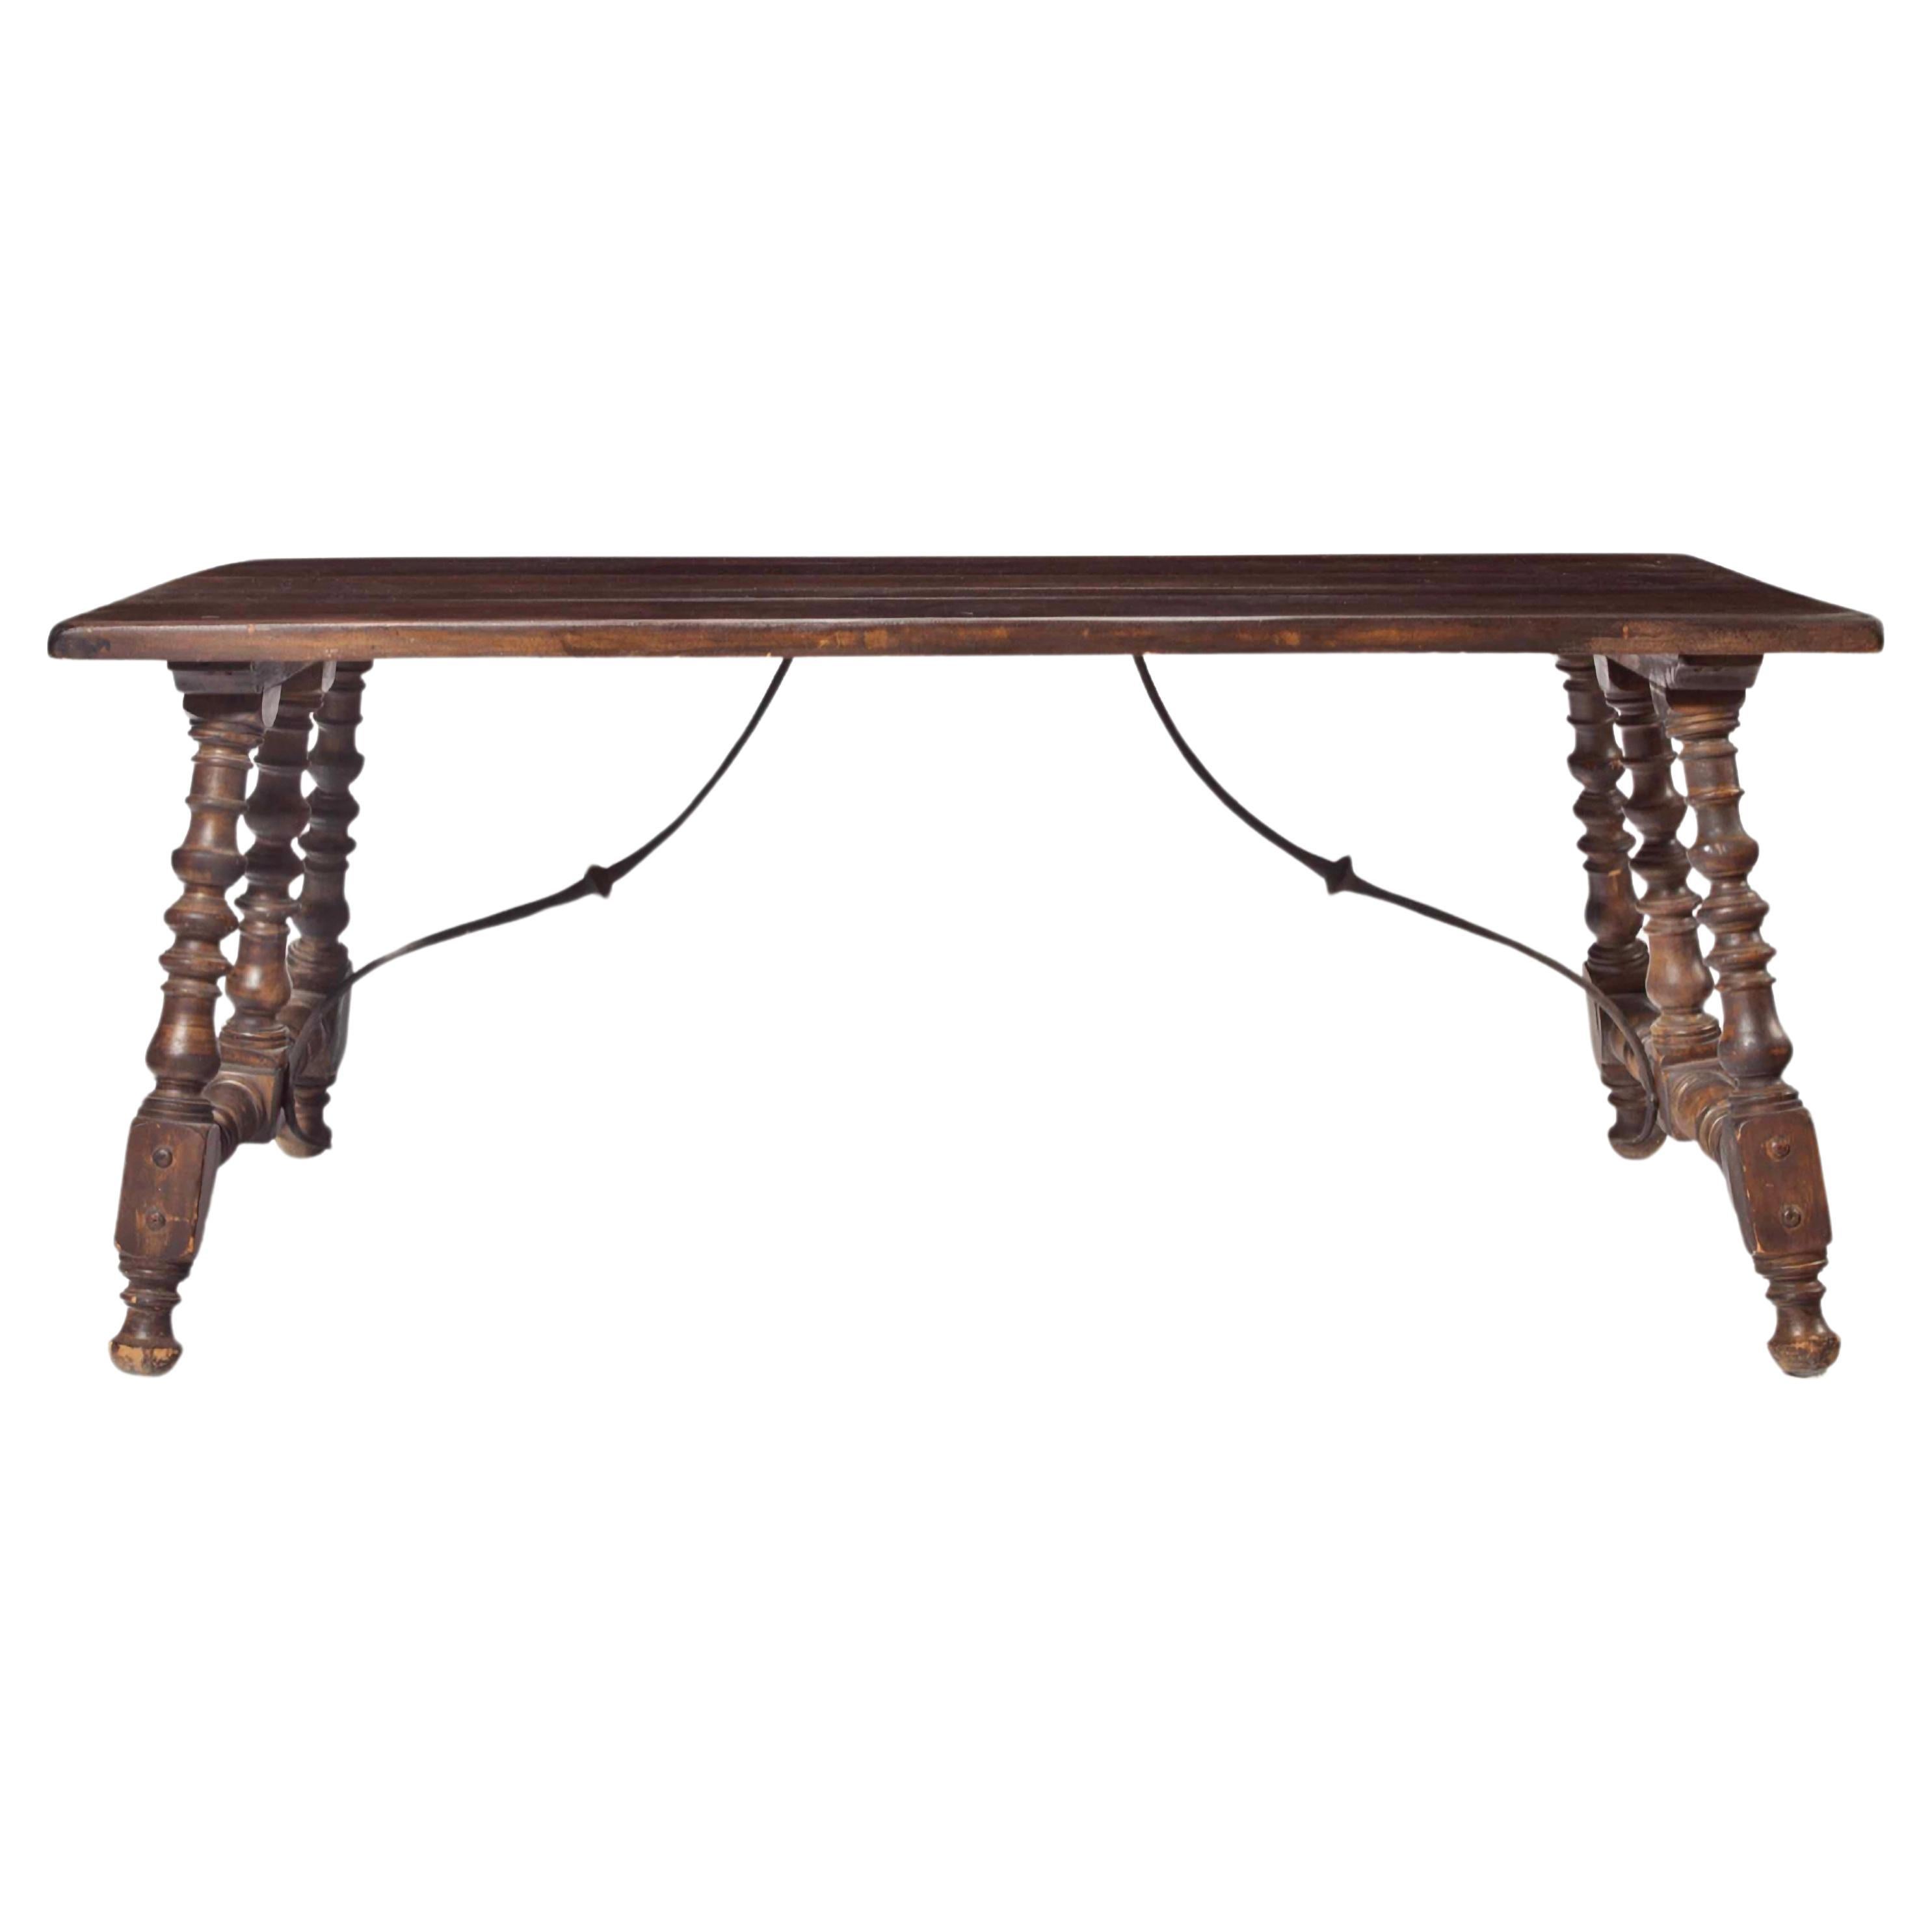 A Spanish Style Stained-Fruitwood Trestle Table, 20th Century For Sale